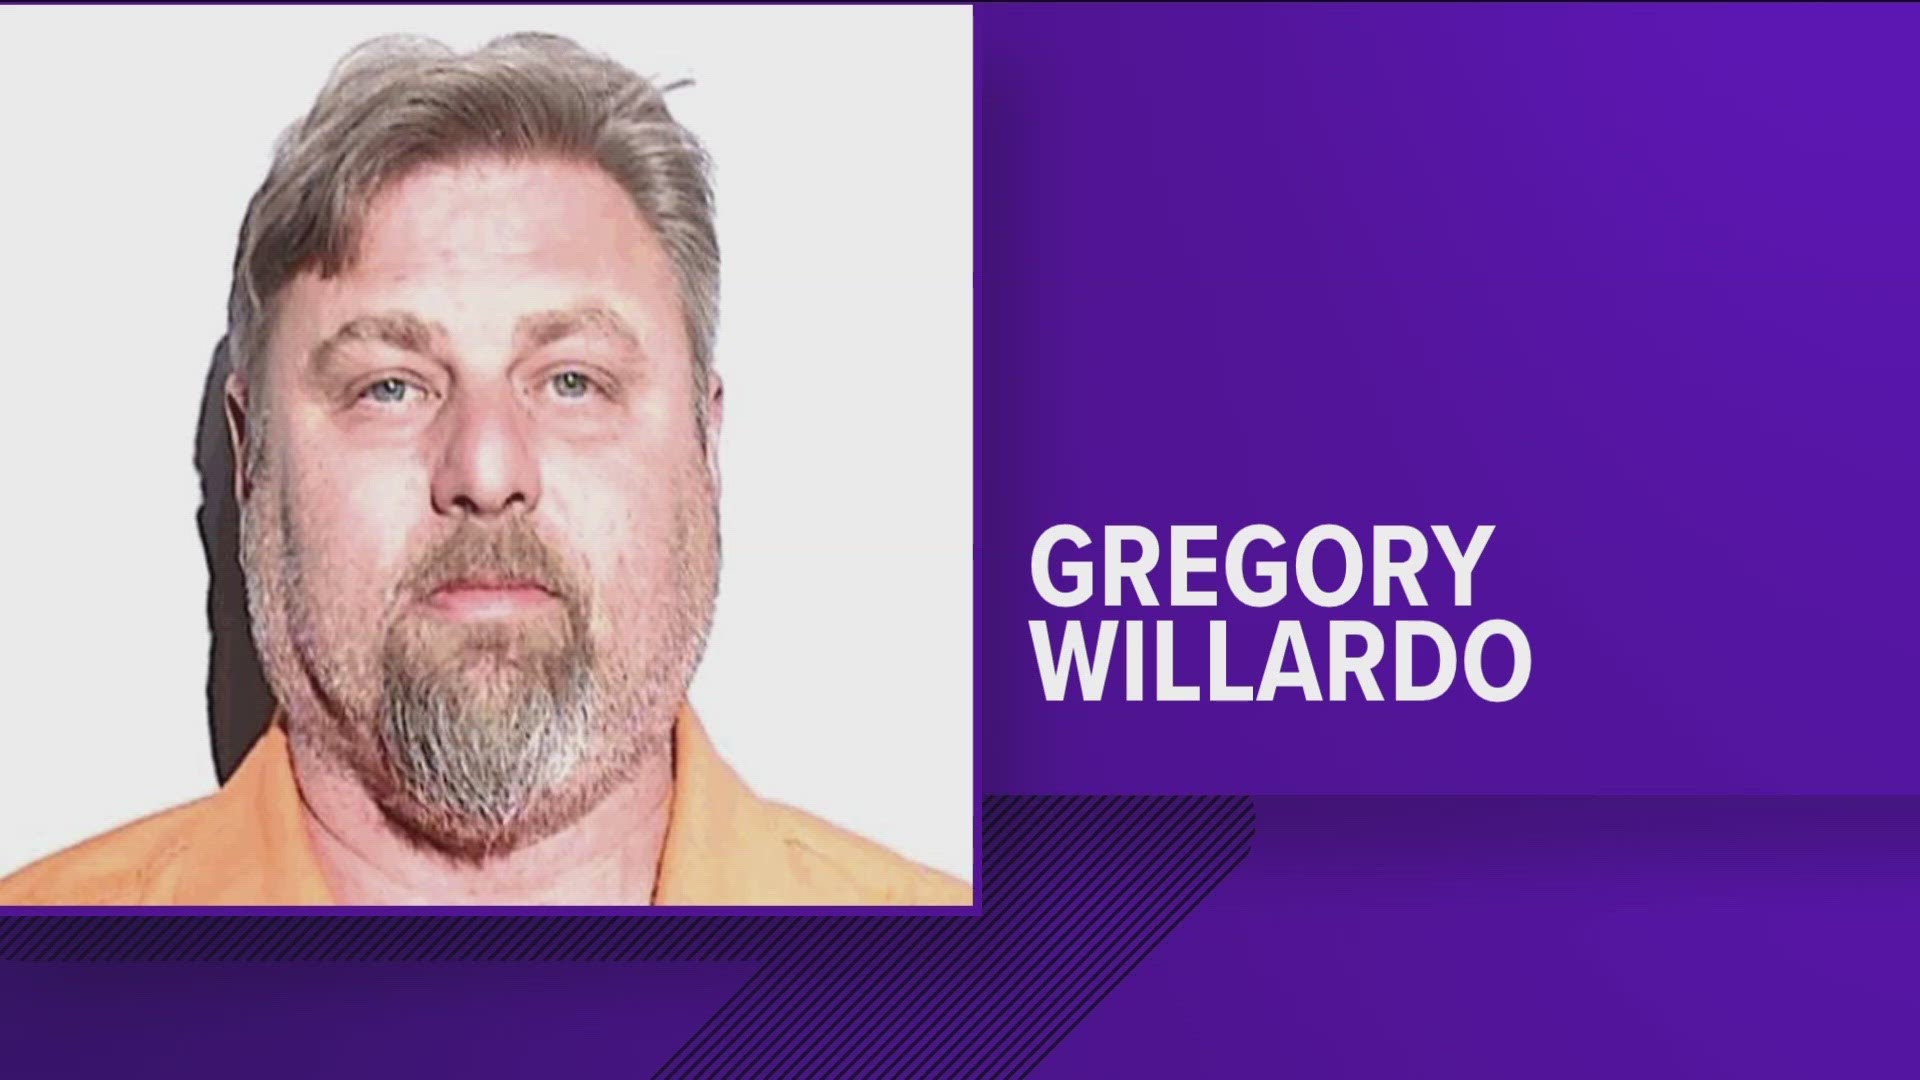 49-year-old Gregory Willardo was arrested Thursday morning and charged with the death of 25-year-old motorcyclist William Zeller in a west Toledo crash.